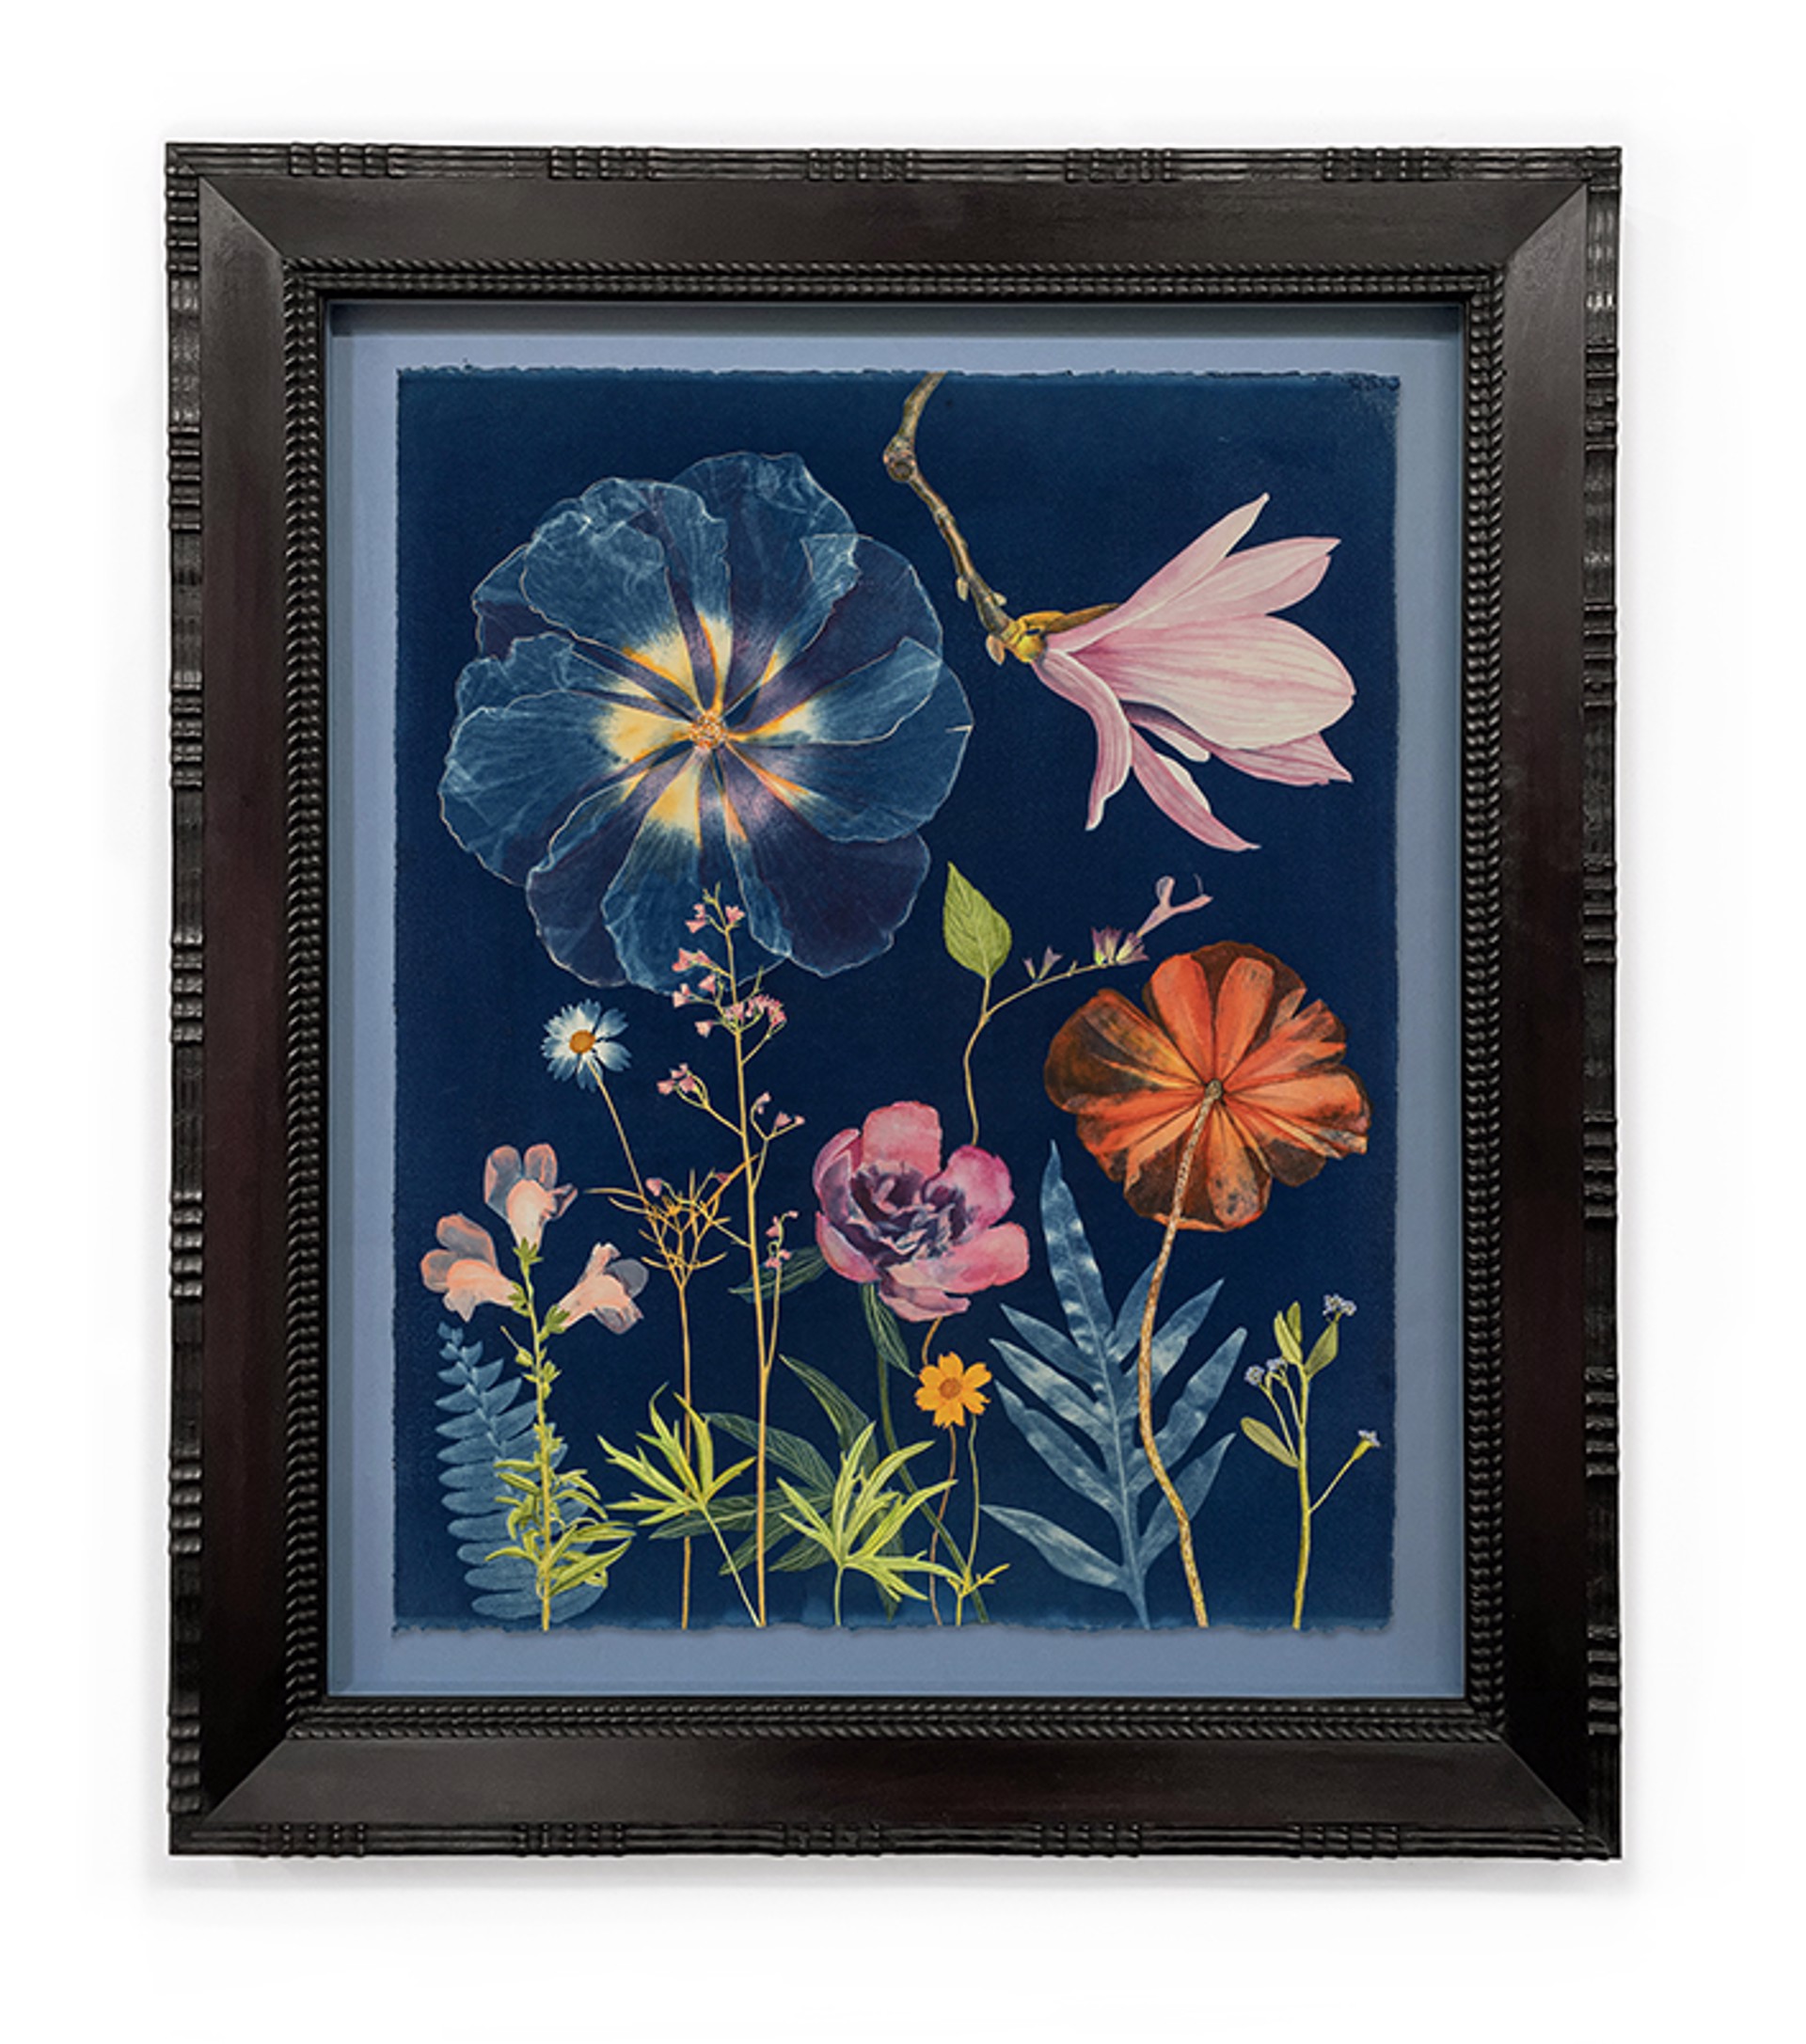 Picturesque Botany (Magnolia, Peony, Poppy, Coral Bells, etc.) by Julia Whitney Barnes